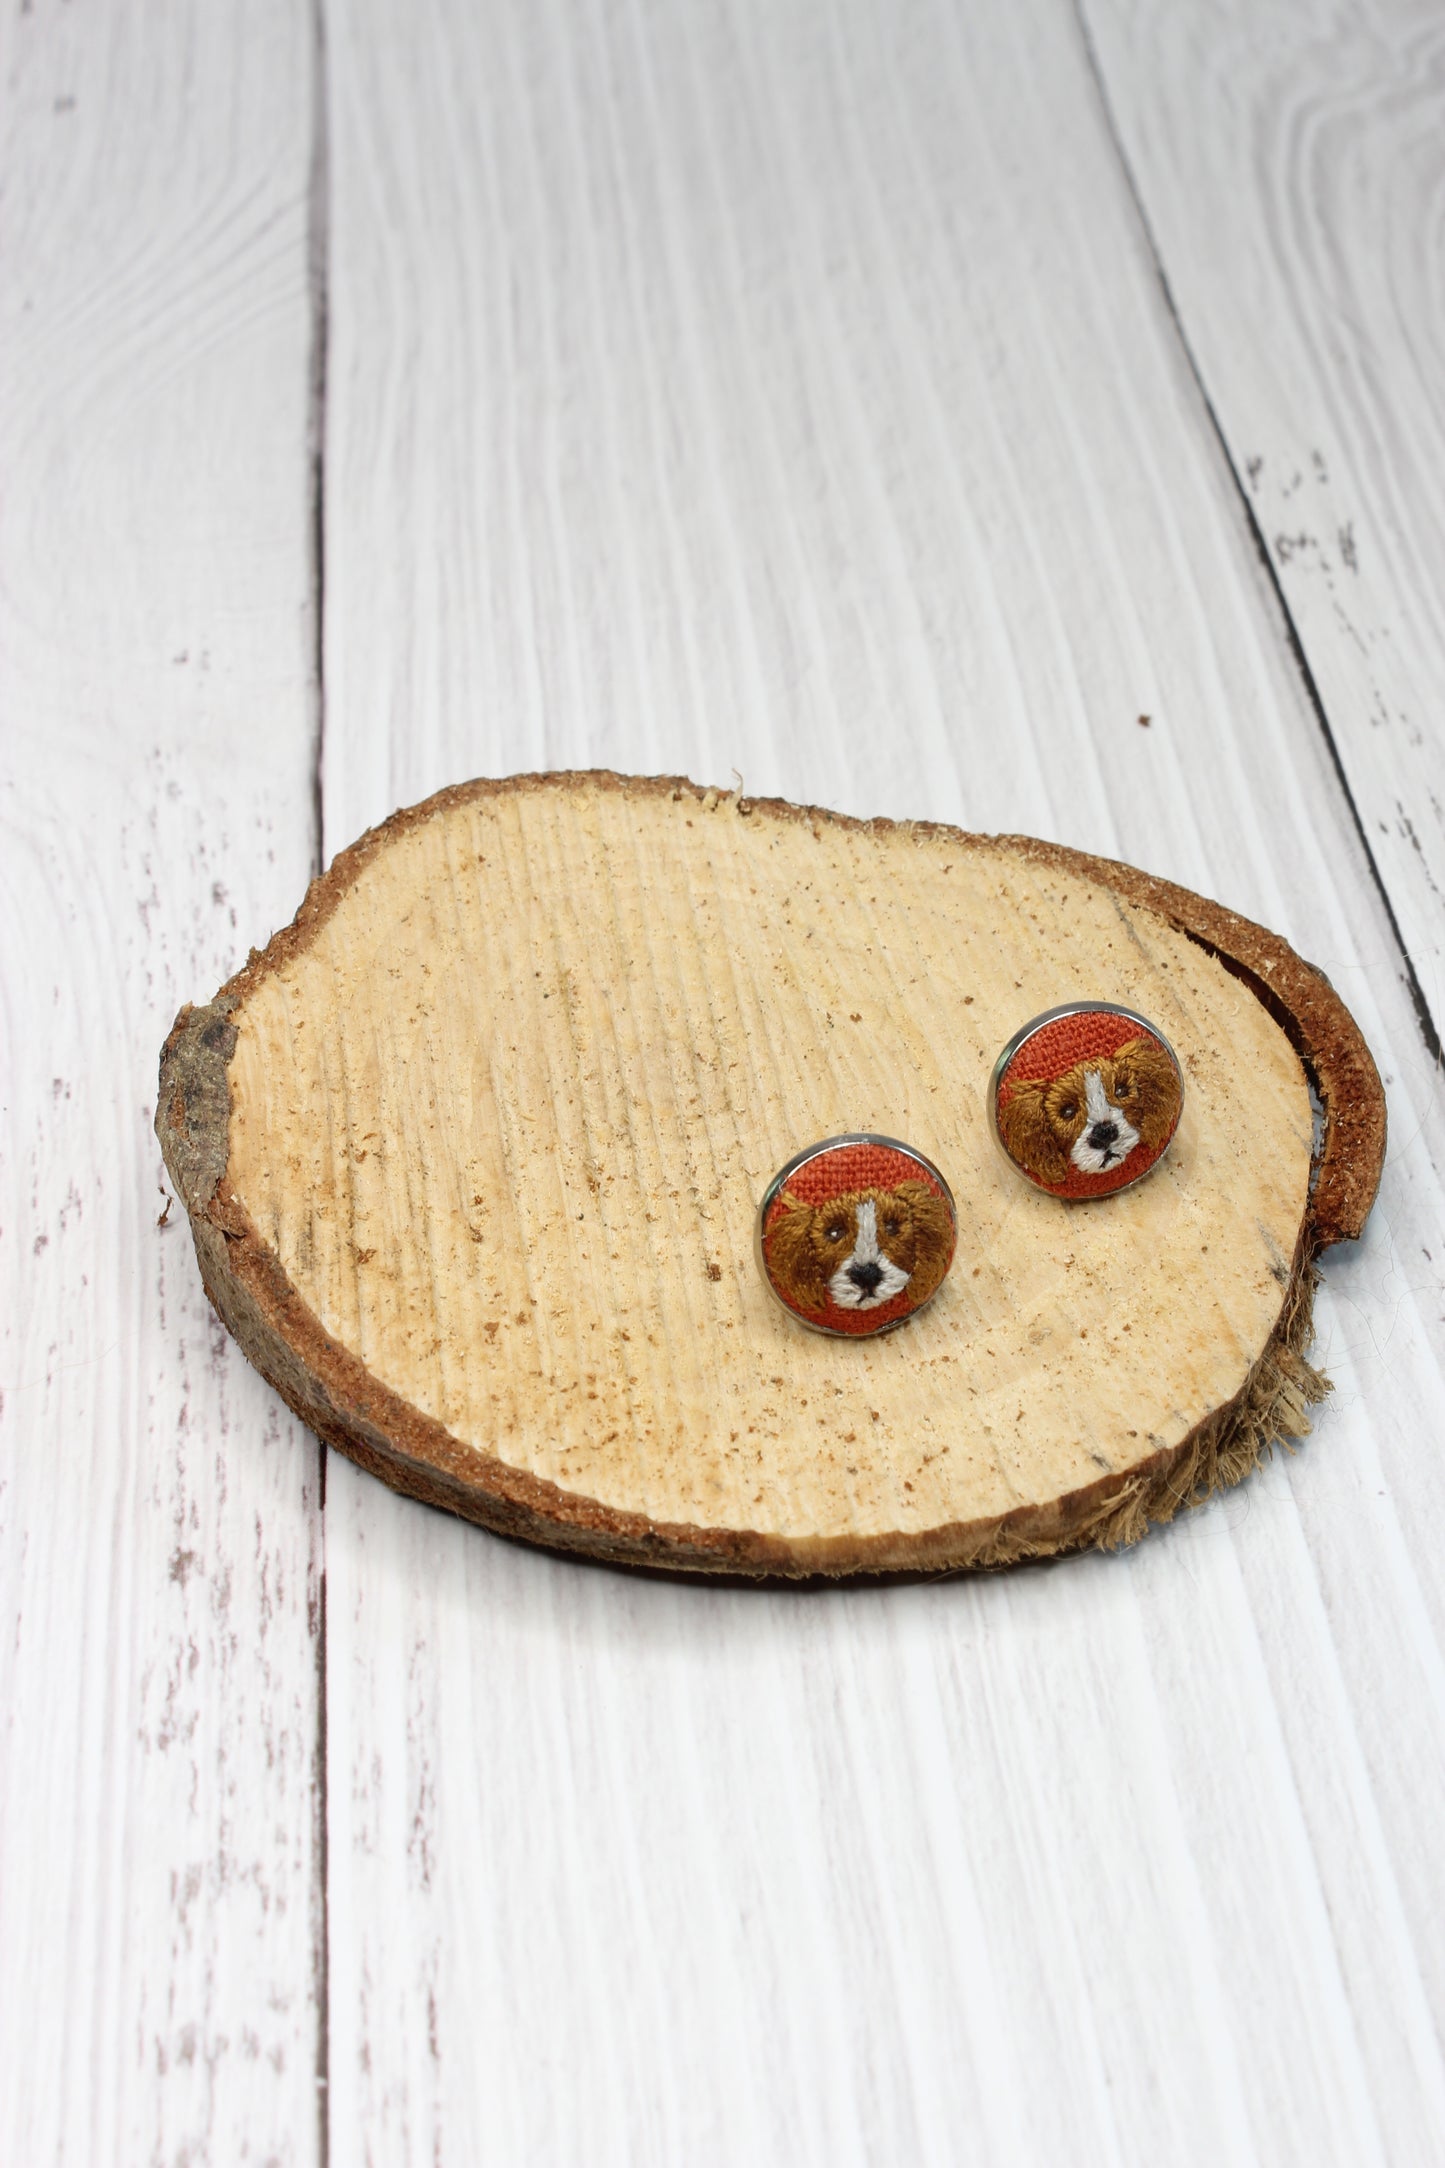 Embroidery King Charles Cavalier Dog Studs Earrings